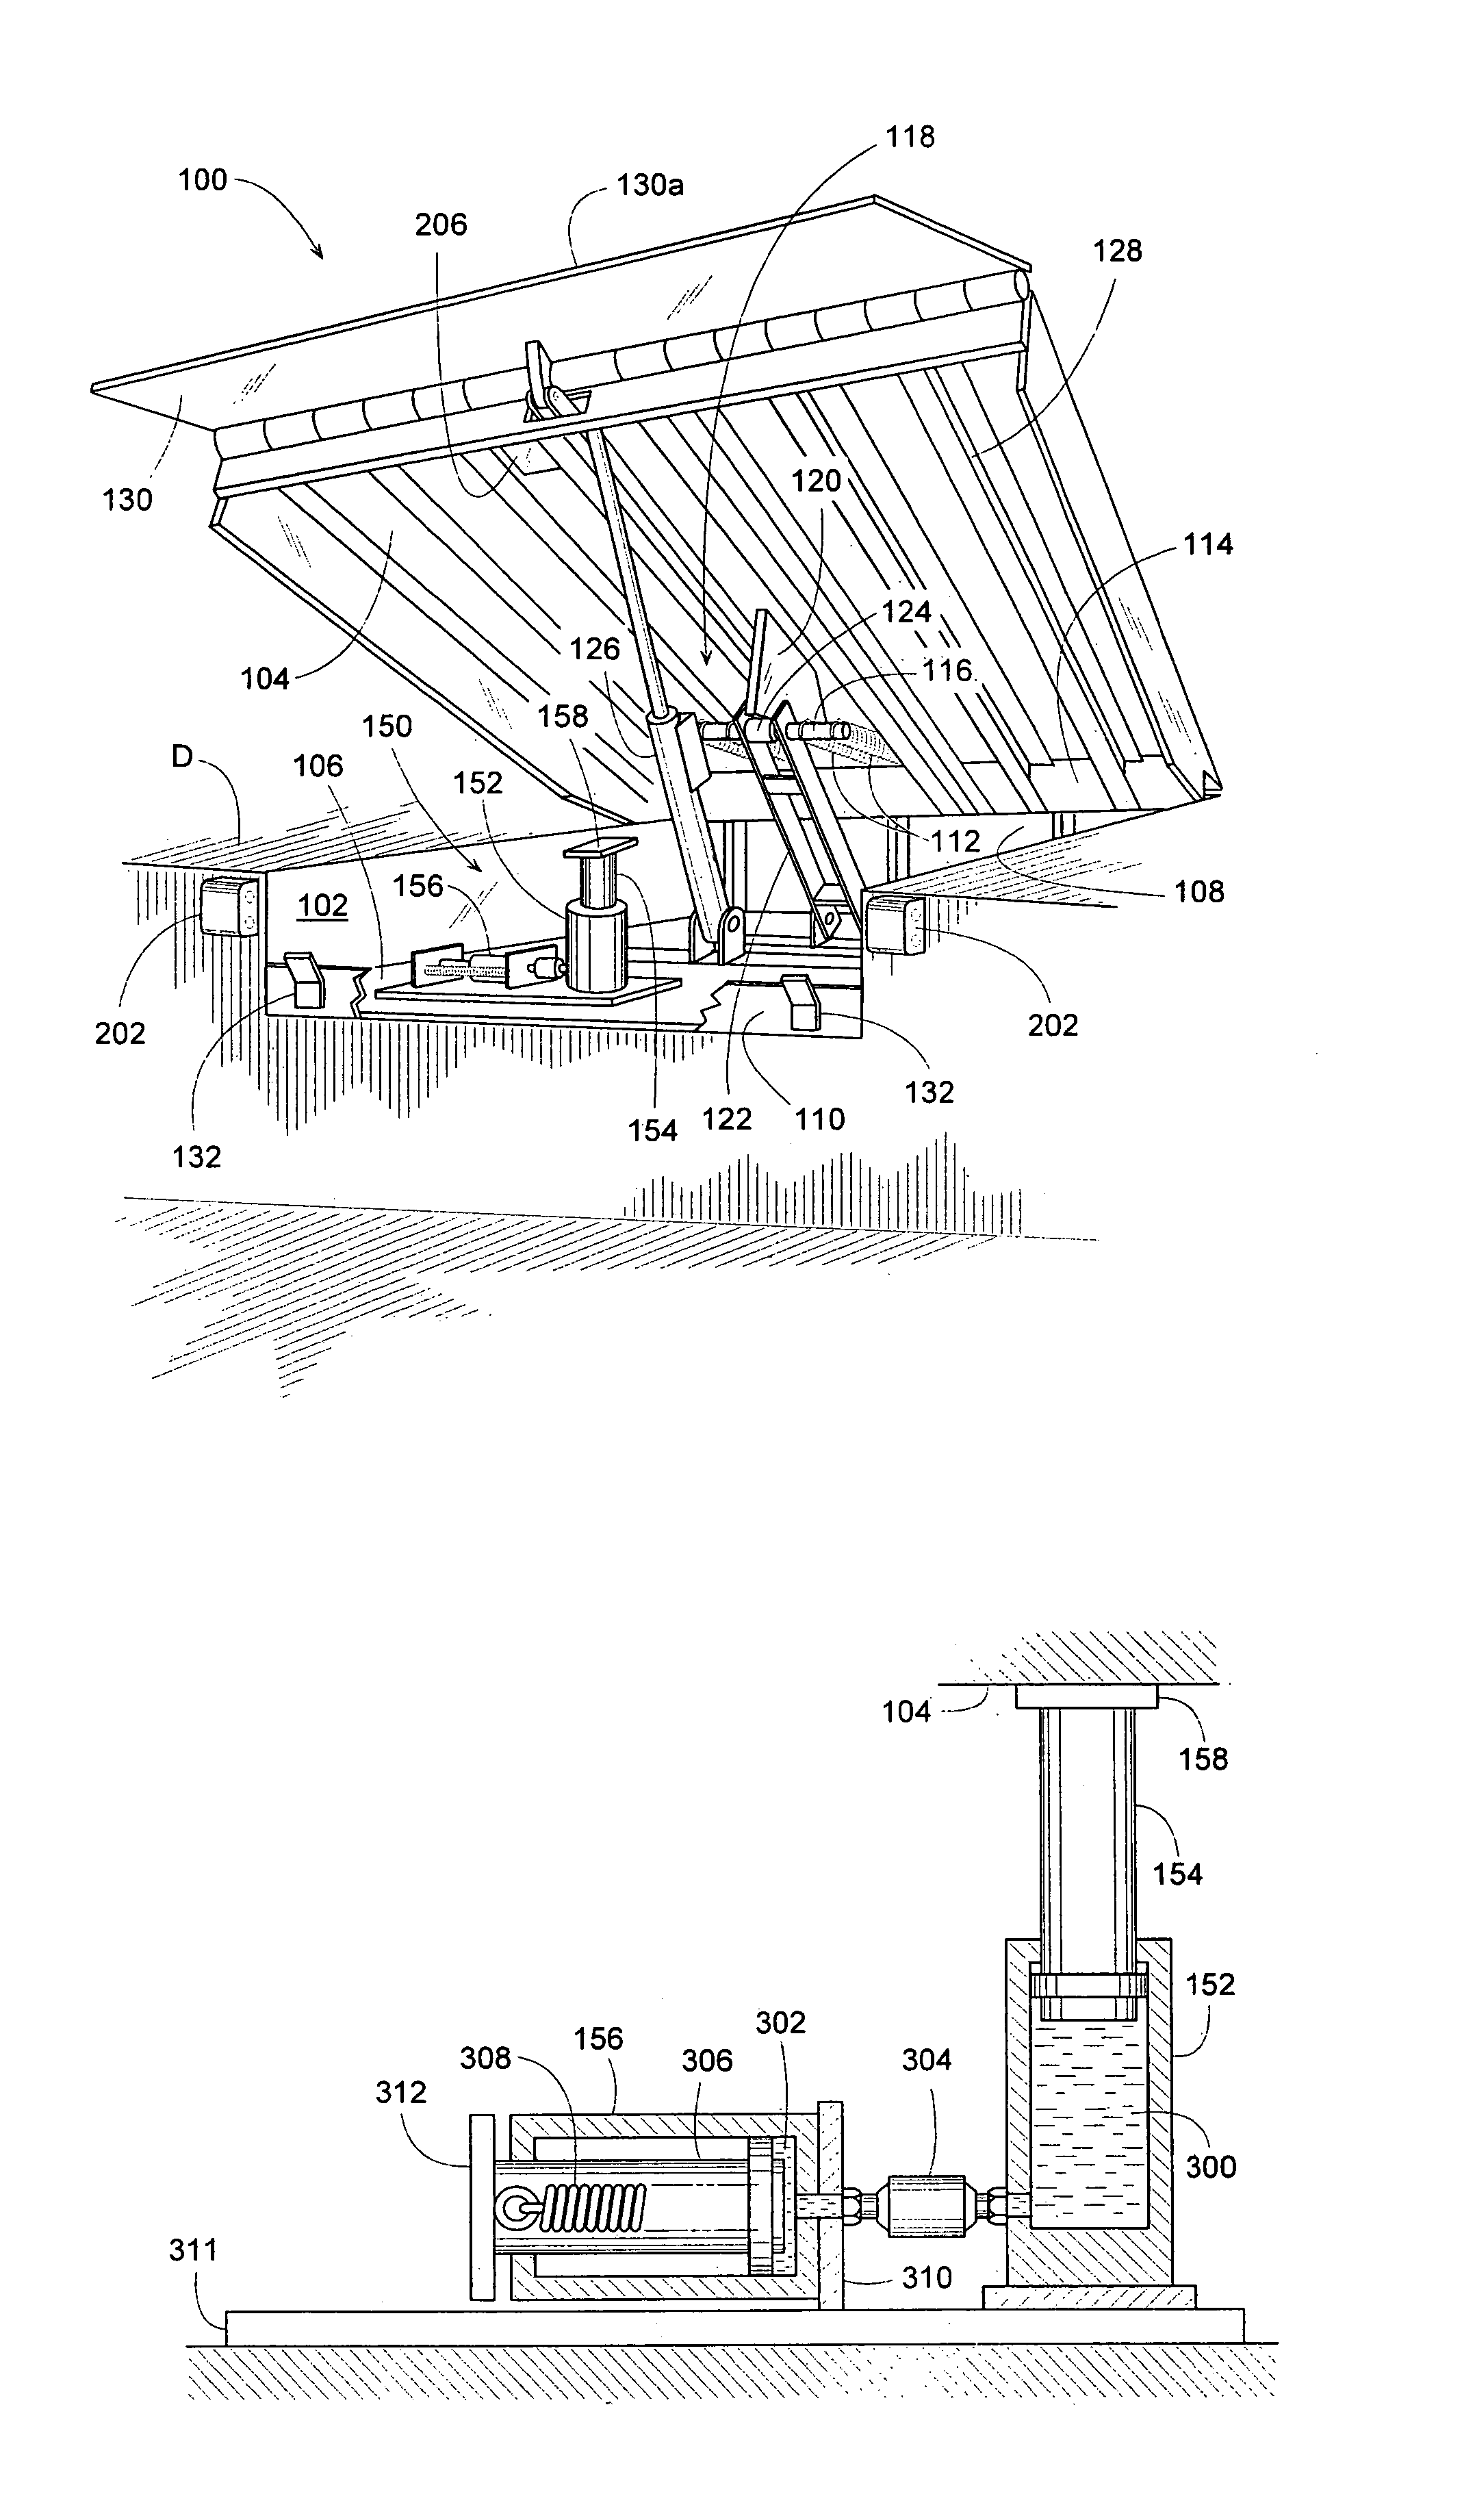 Stump-out apparatus for a dock leveler